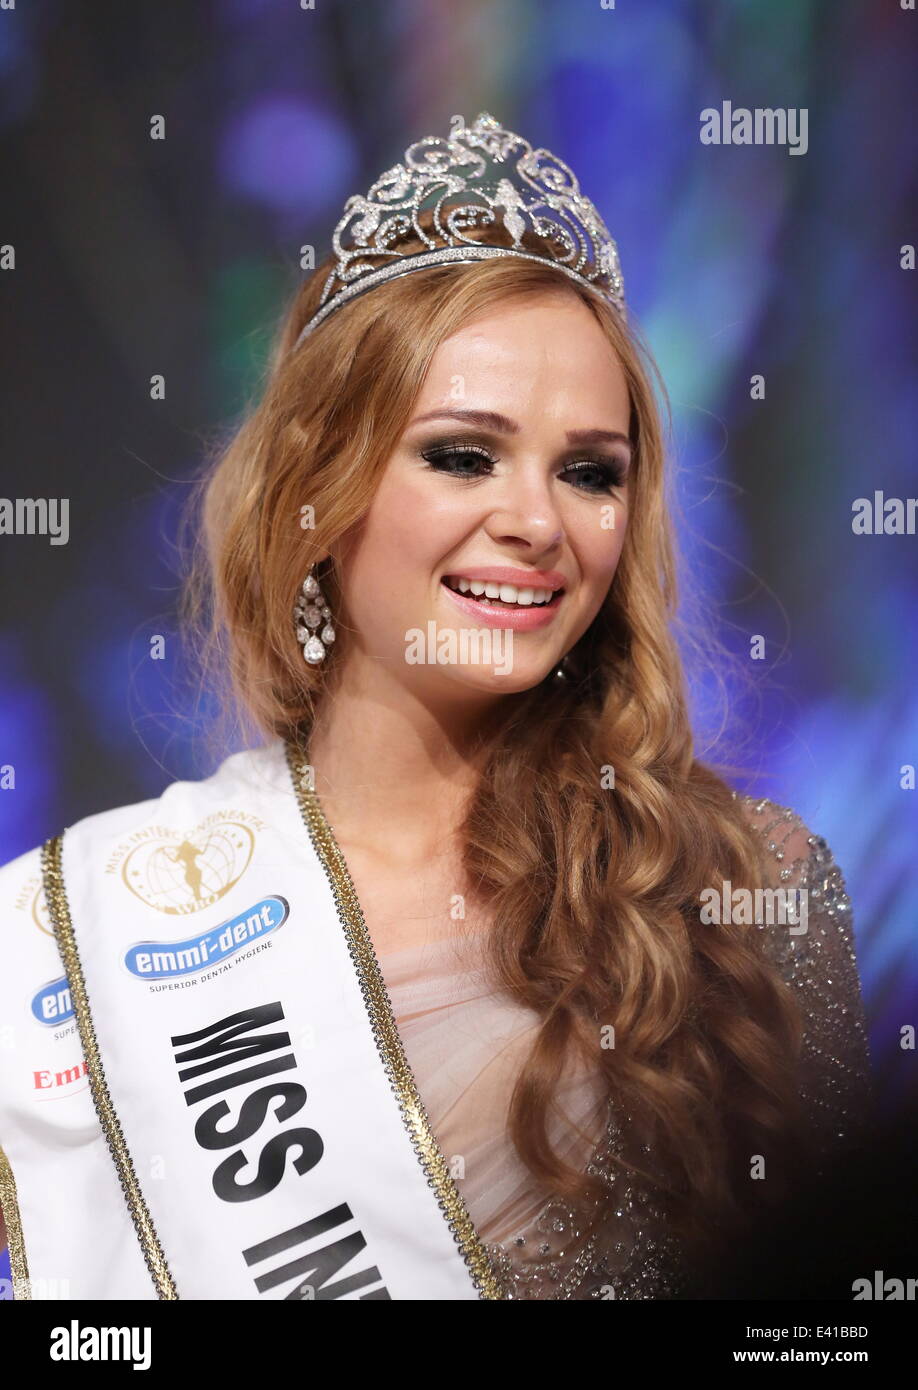 Beauty Contest Miss Intercontinental 2013 Held In Magdeburg Winner Is Miss Russia Ekaterina